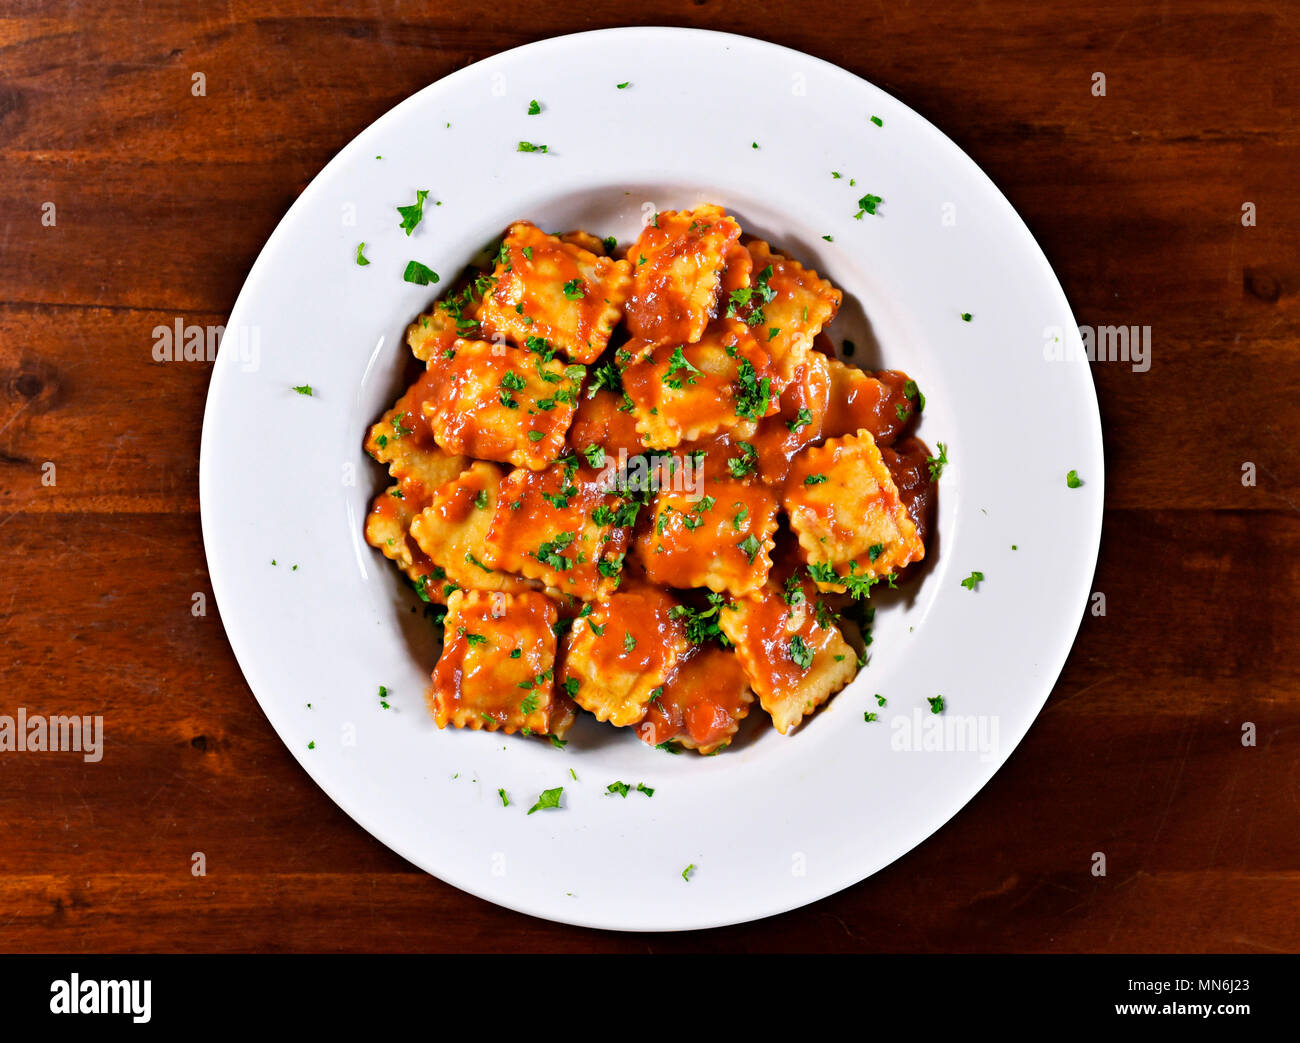 Fresh ravioli pasta with parsley and basil leaf, italian cuisine. White plate and wooden table, pasta dish. Stock Photo